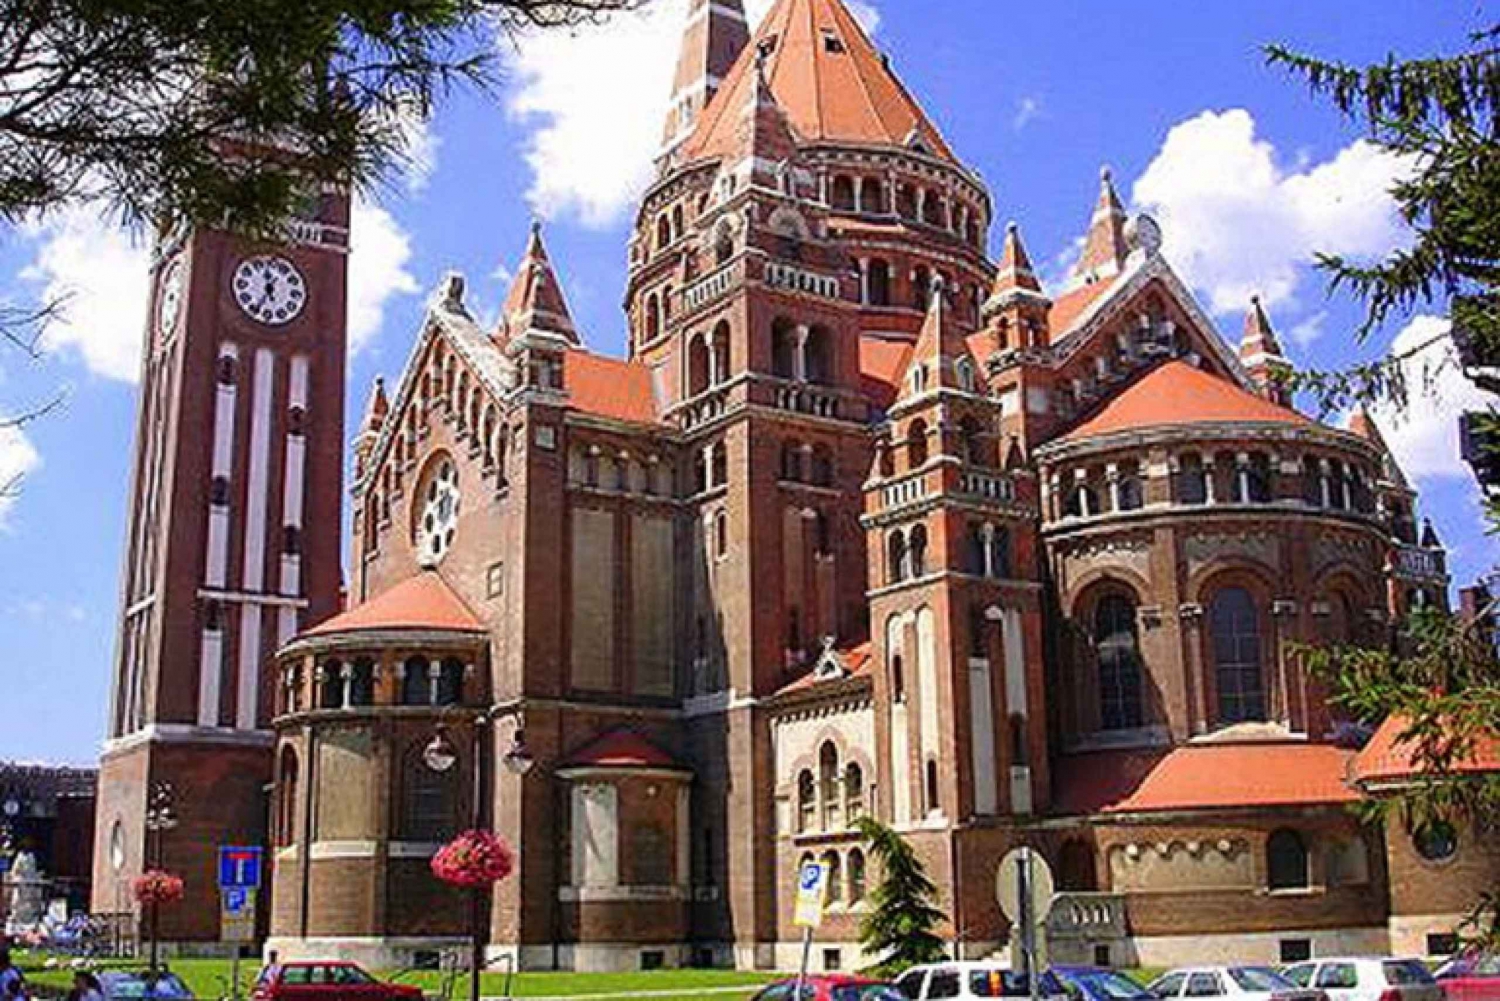 Szeged Full-Day Private Sightseeing Tour from Budapest